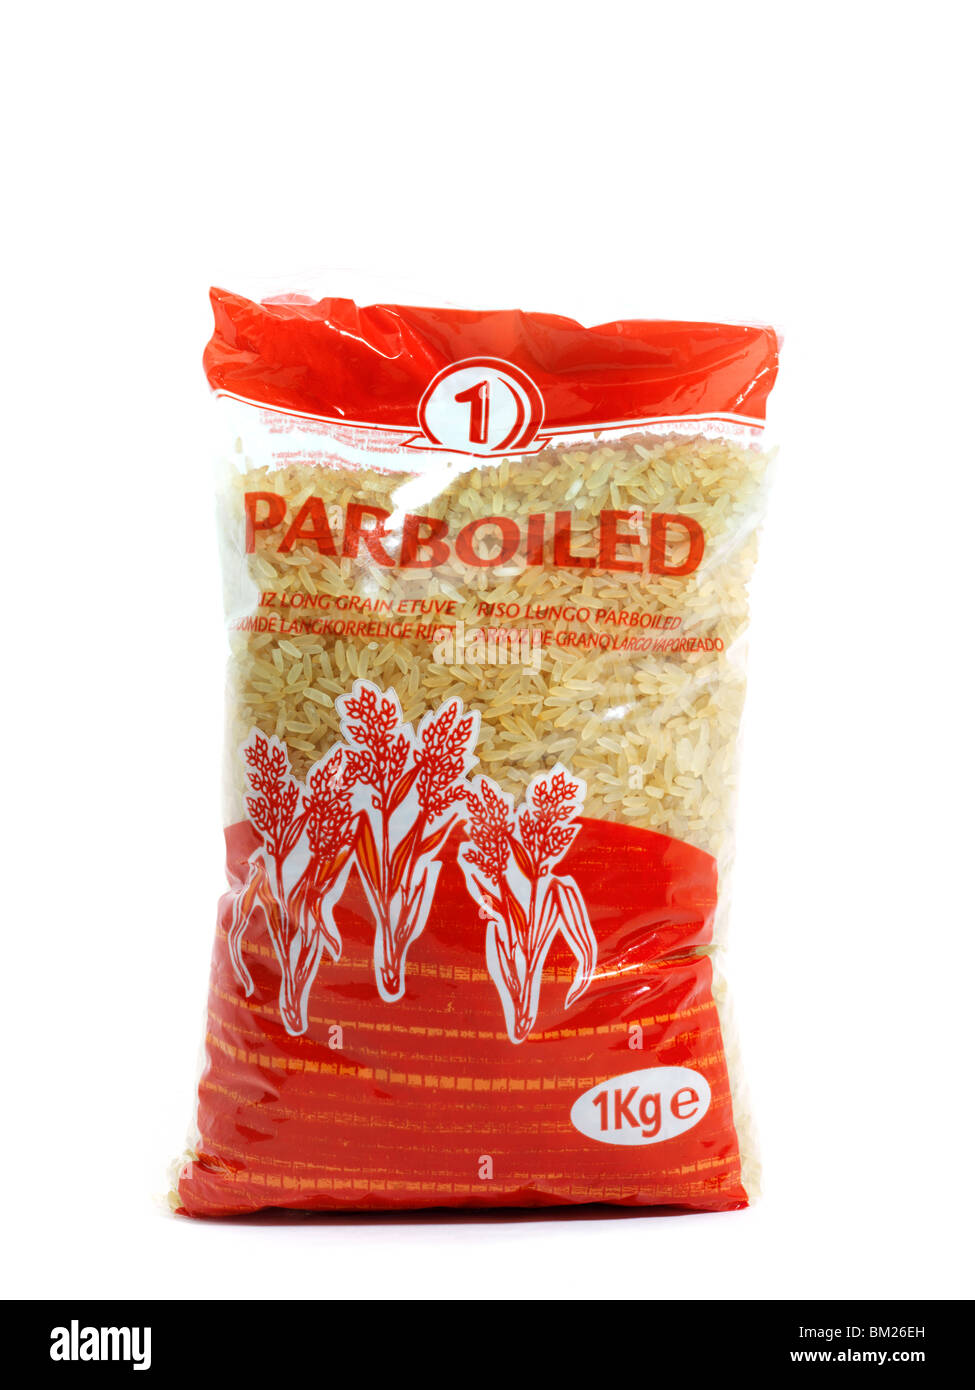 Bag of Parboiled Rice Stock Photo